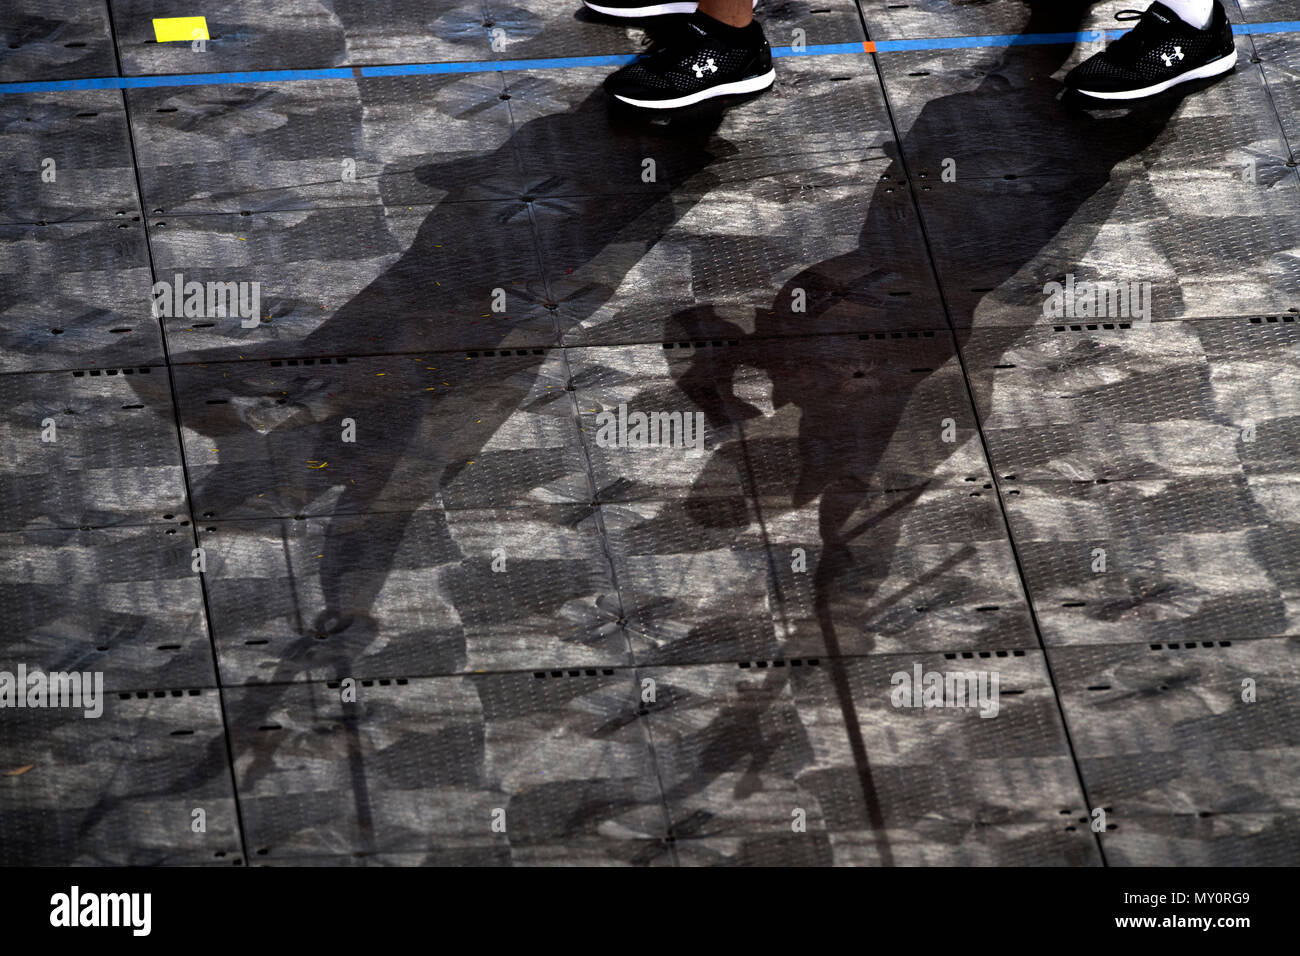 Shadows from a pair of archers decorate a floor during practice for the 2018 Warrior Games at the Air Force Academy in Colorado Springs, Colo. June 1, 2018. (DoD photo by EJ Hersom) Stock Photo